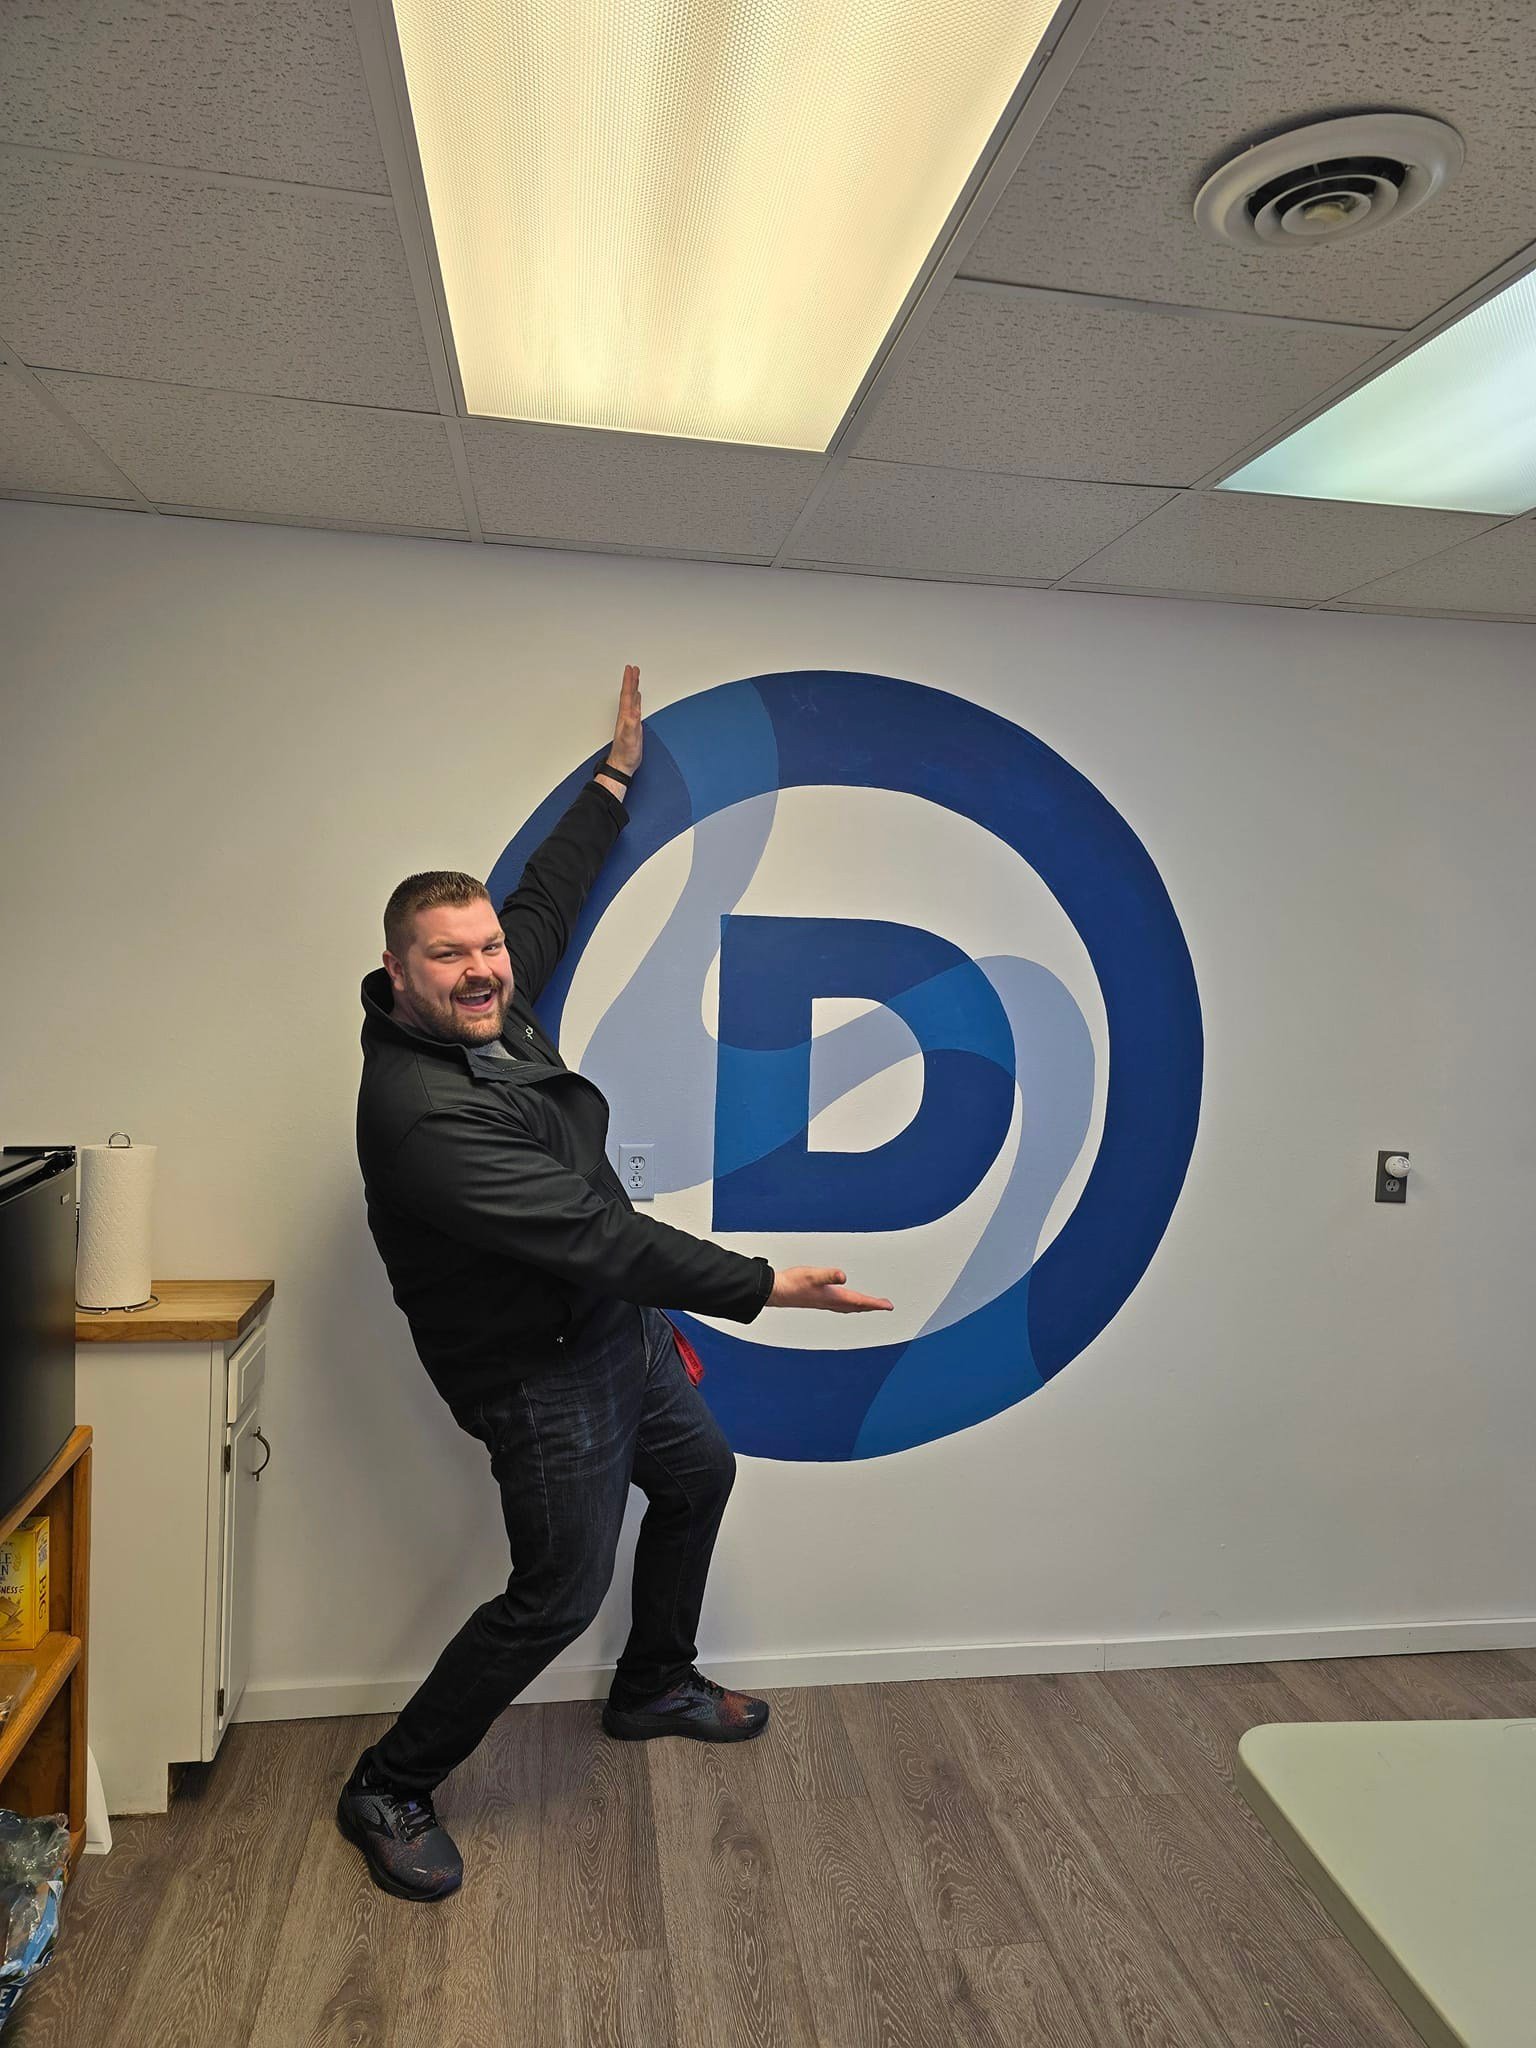 I was at the Dunn County Democrats&rsquo; office today, hanging out, and chatting about the issues! I look forward to returning soon. ☺️